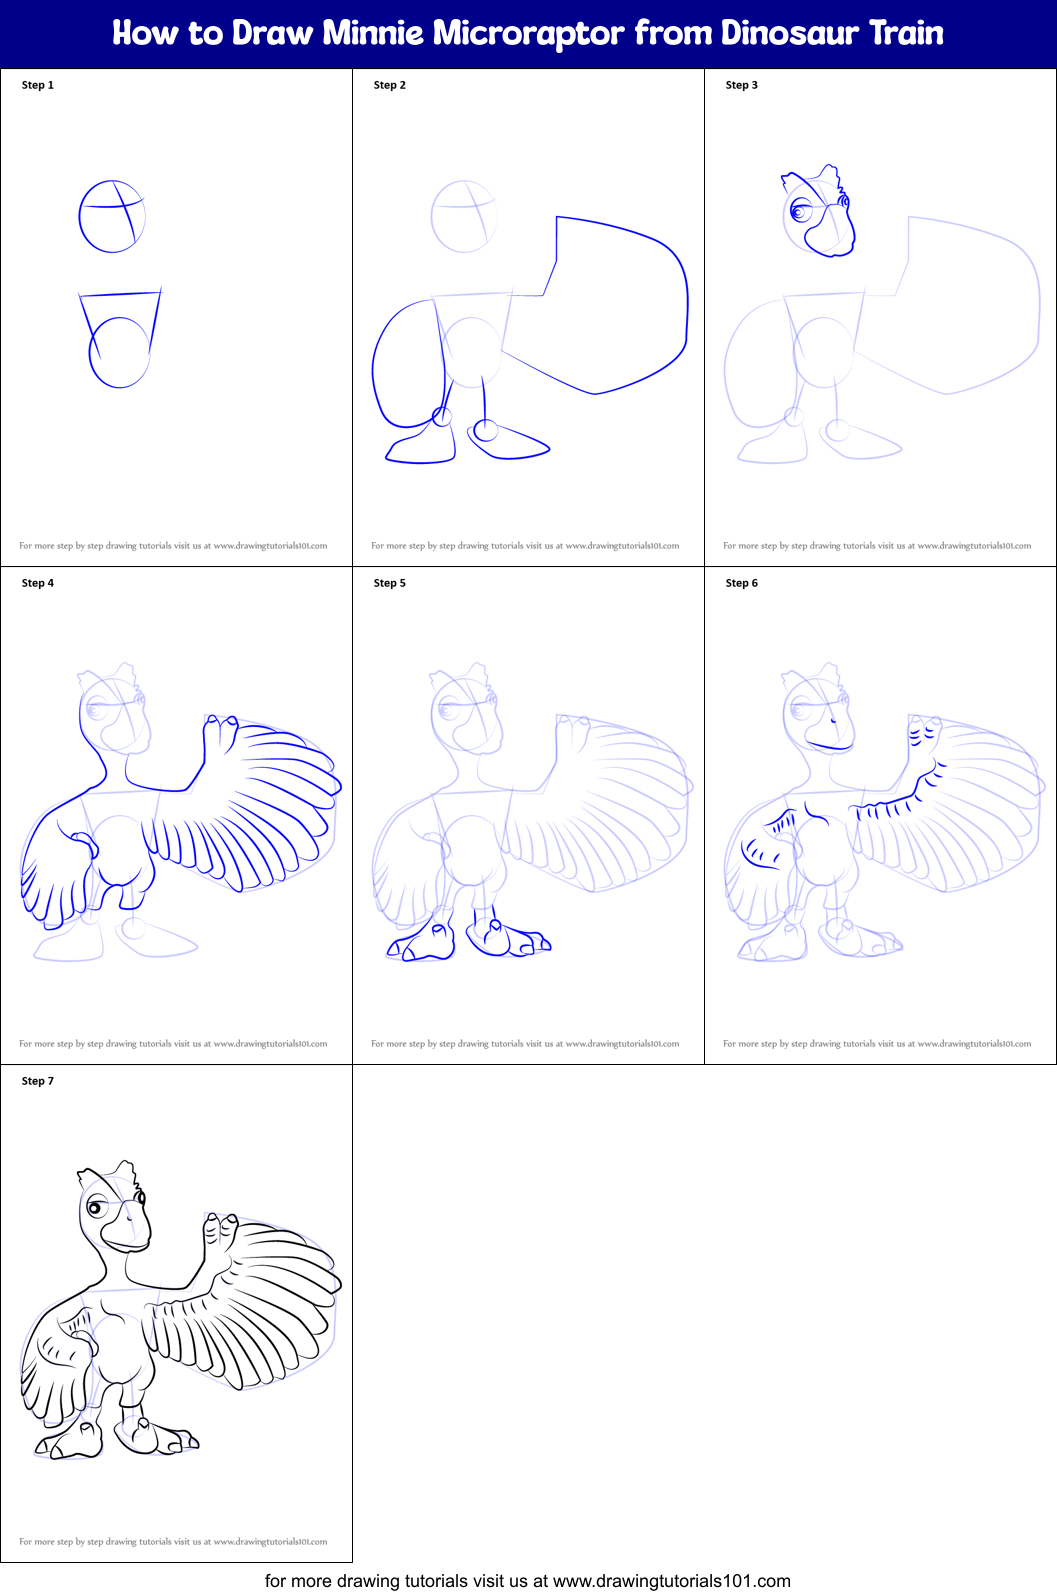 Download How to Draw Minnie Microraptor from Dinosaur Train printable step by step drawing sheet ...